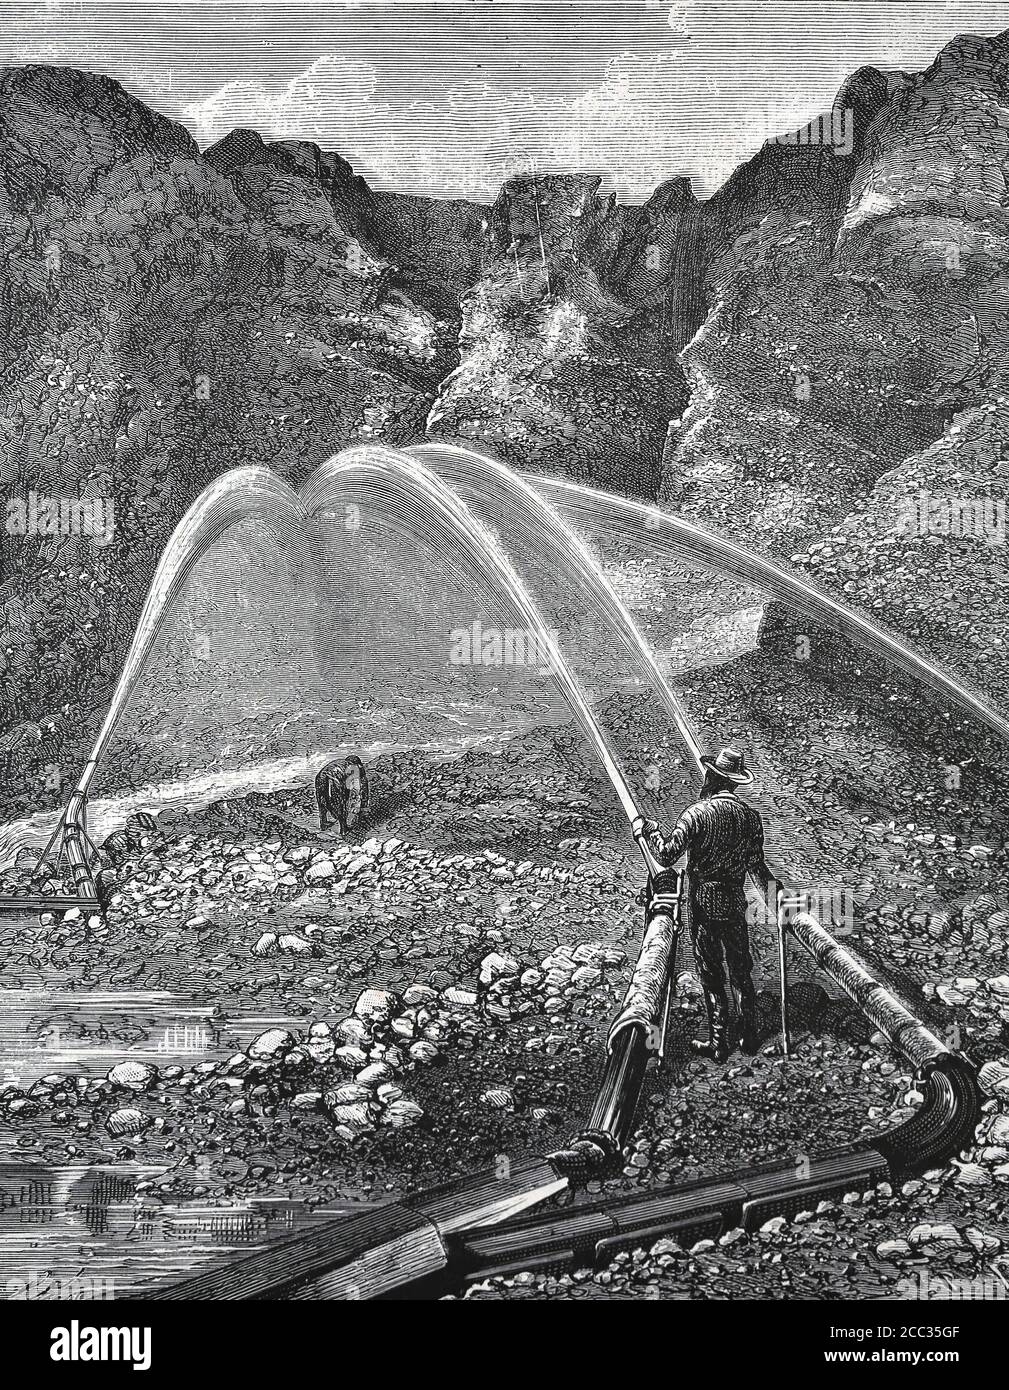 California Gold Rush,  (1848-1855) . Hydraulic mining system. Engraving  illustration from a photography, c.1860. Stock Photo